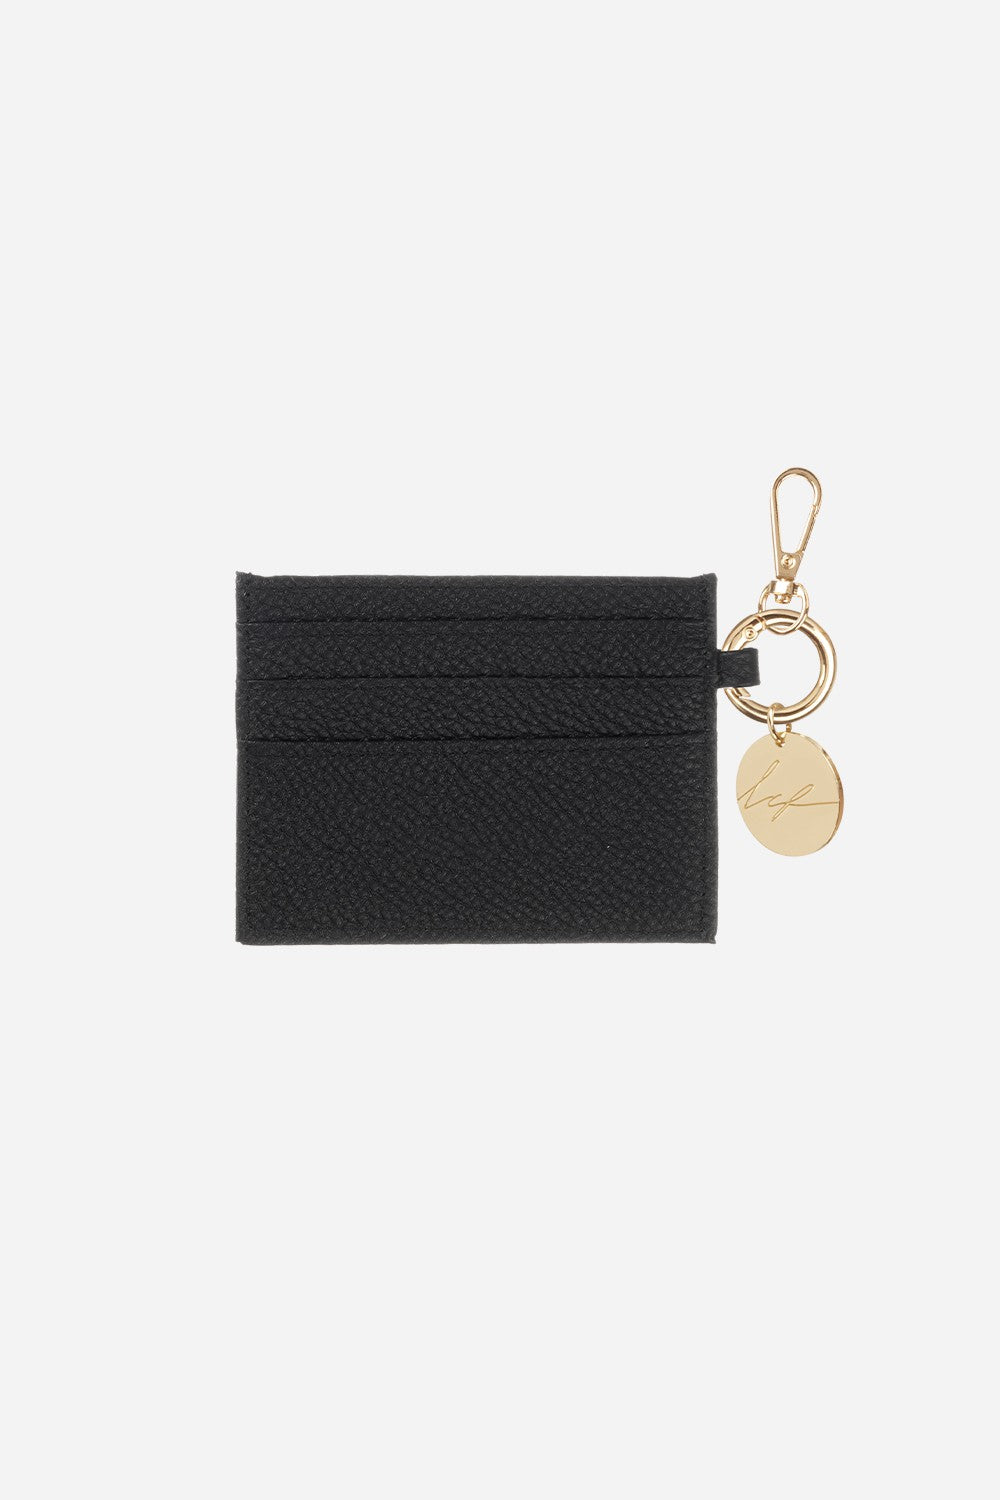 Card Holder With Carabiner Black Leather